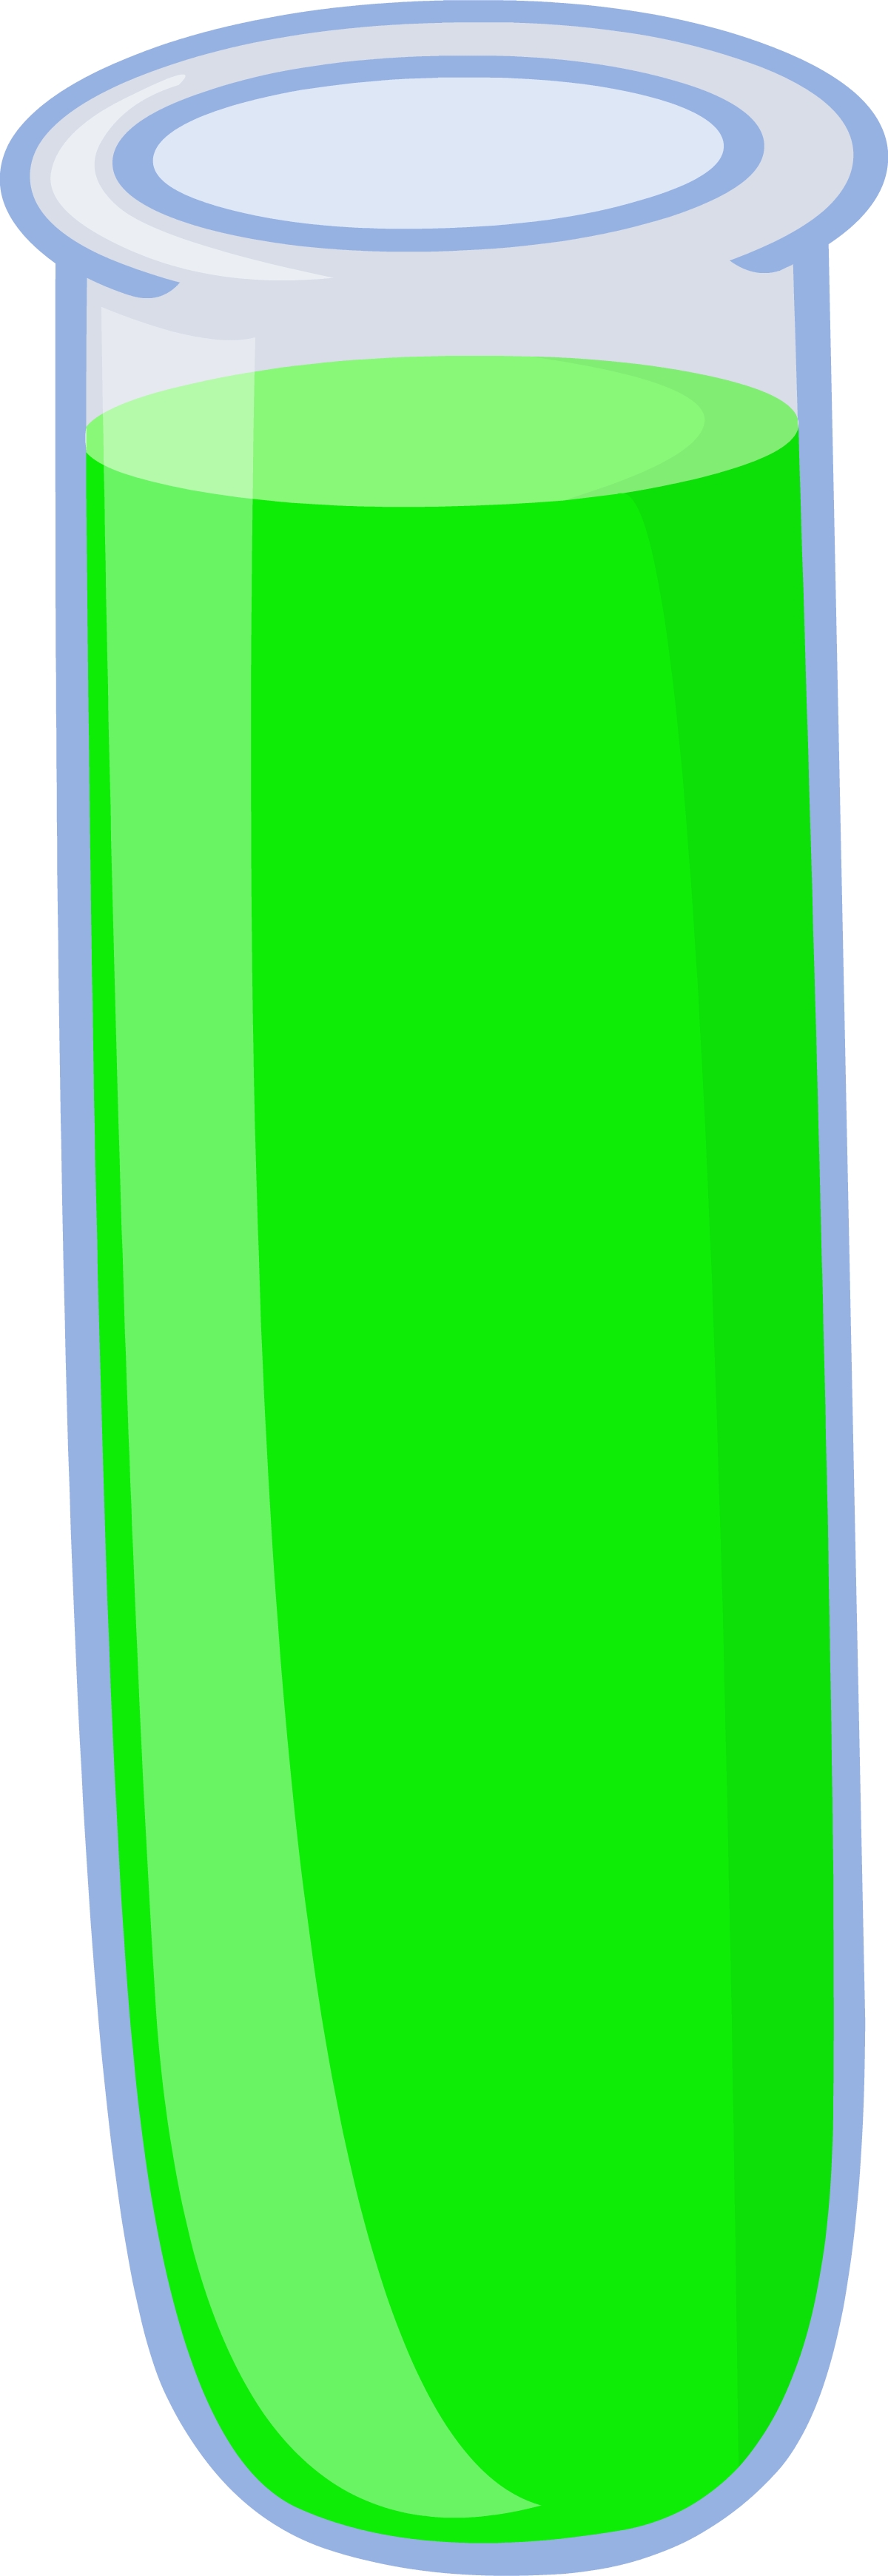 A Green Rectangular Object With Blue Edges